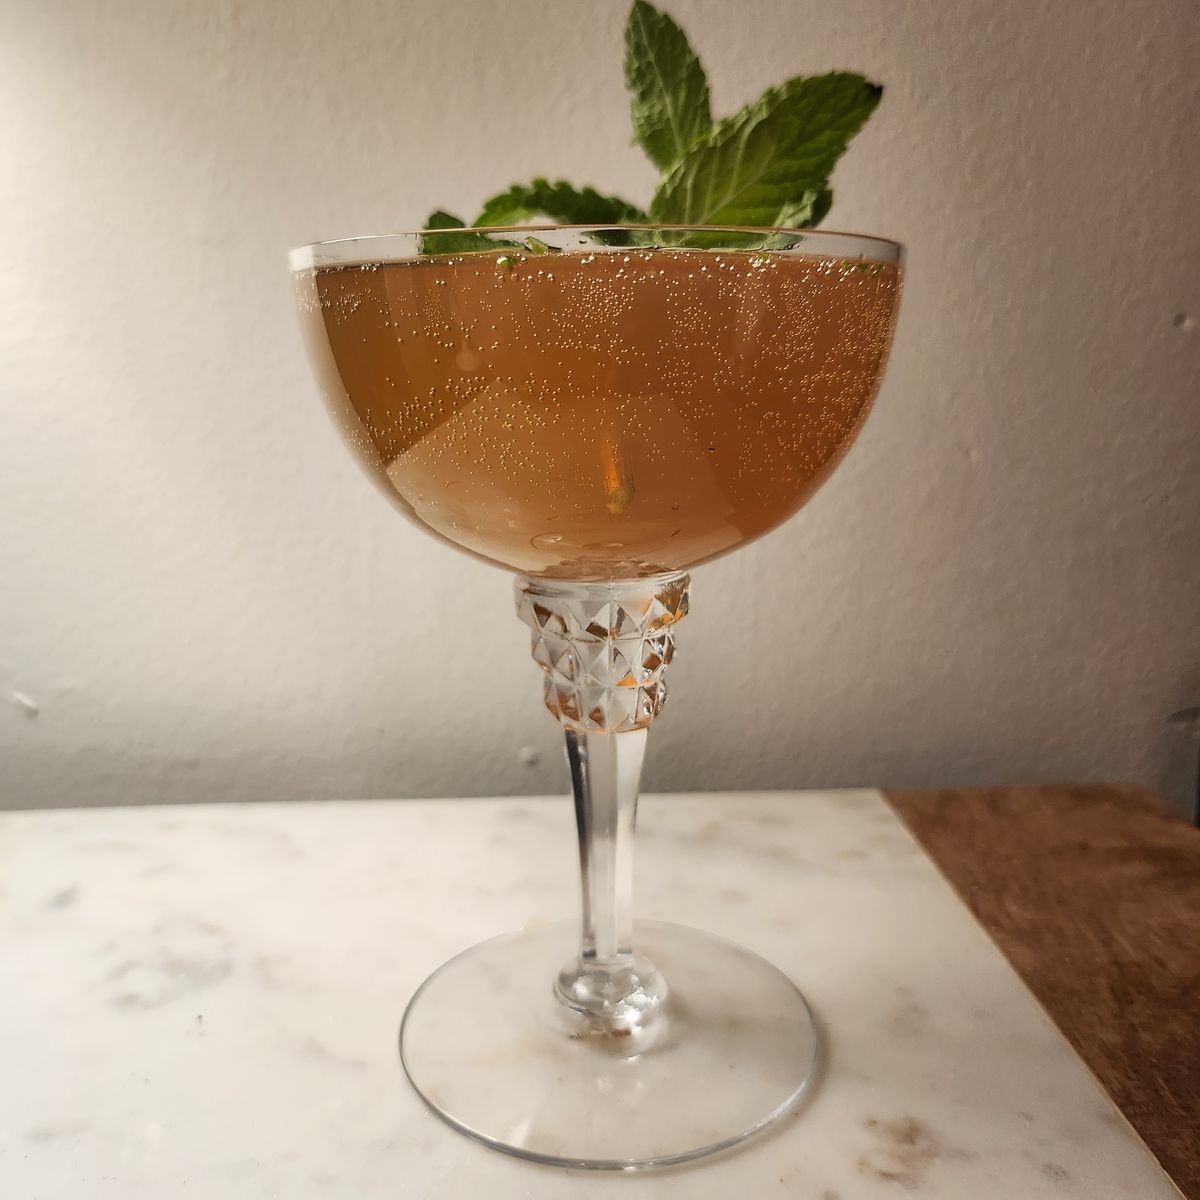 A Mojito made with dark rum and topped with sparkling wine